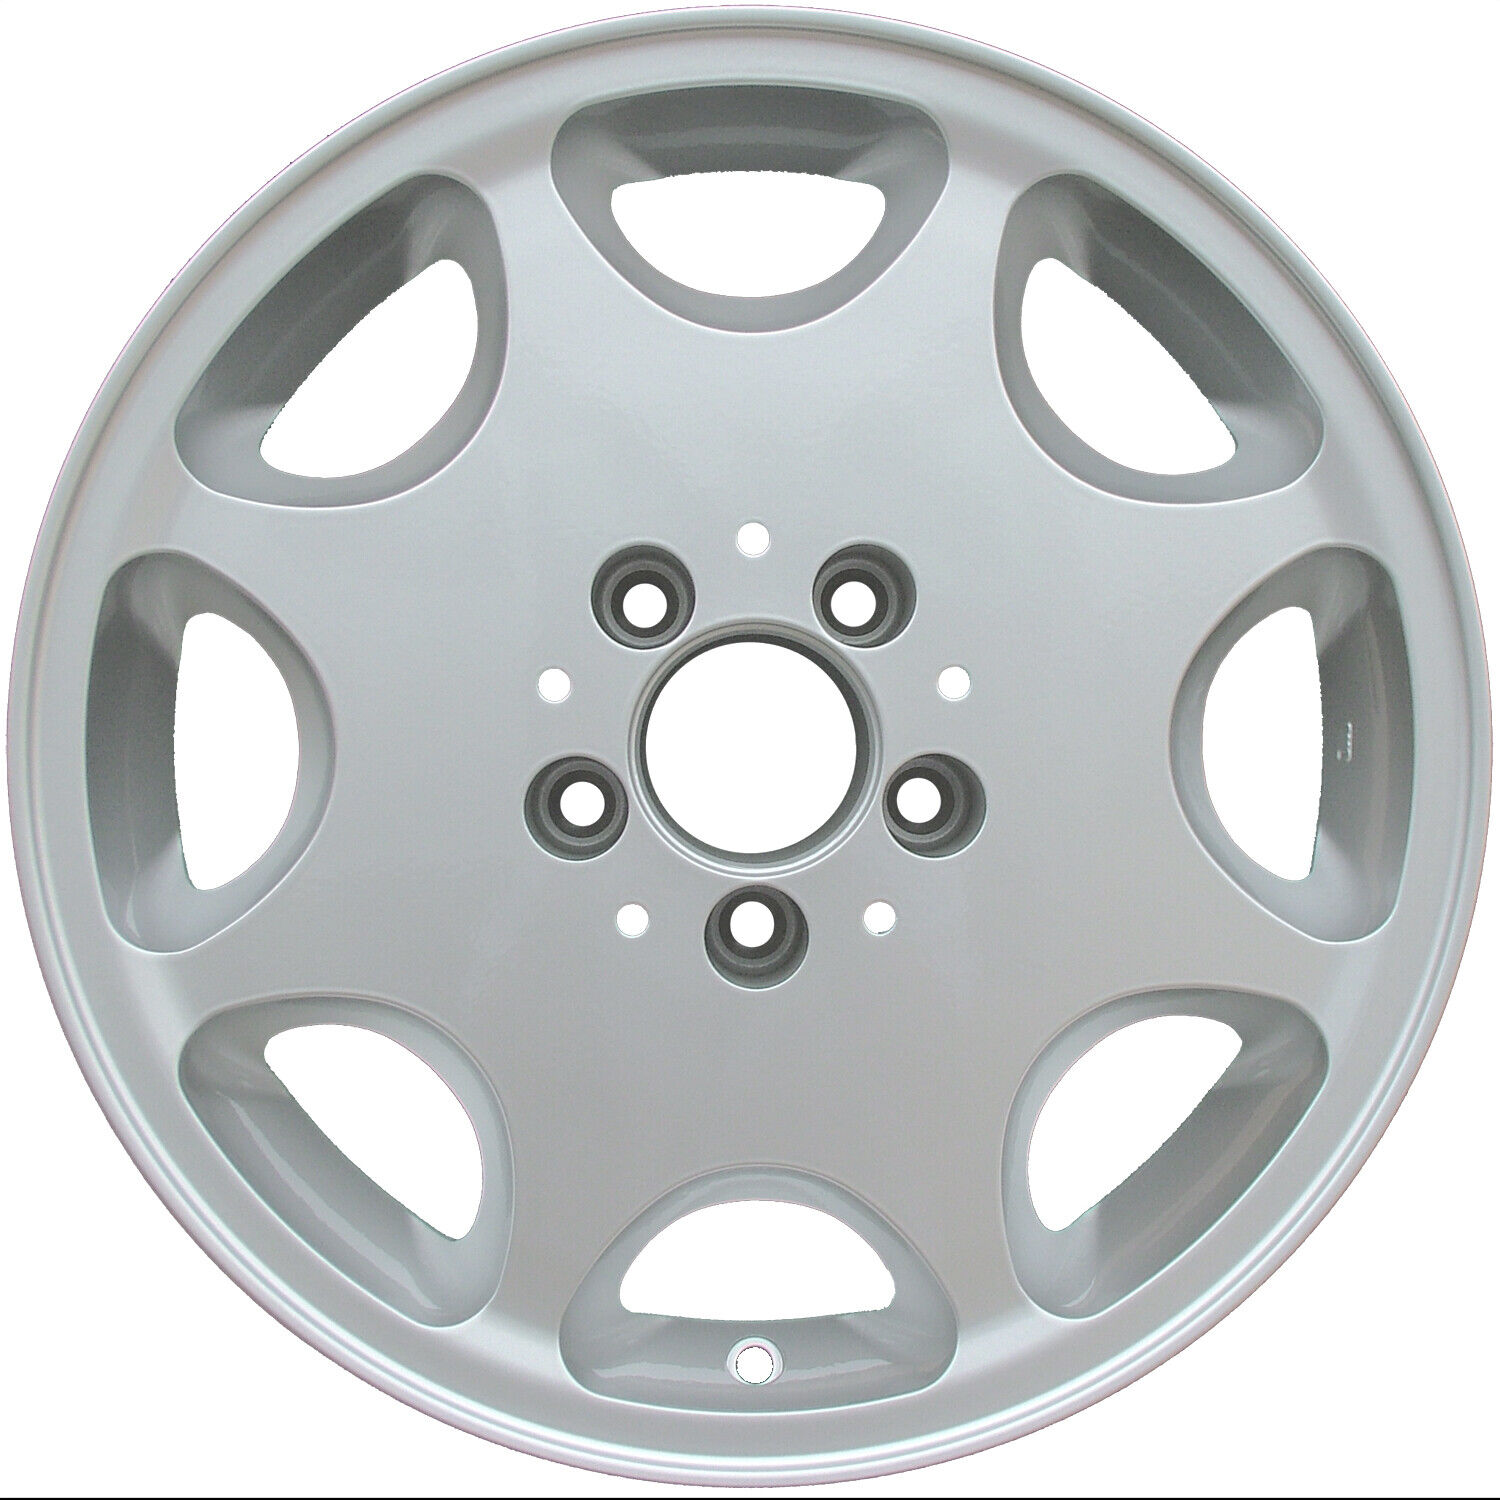 Refurbished 16x7.5 Painted Silver Wheel fits 1992-1993 Mercedes 300Sd 560-65153